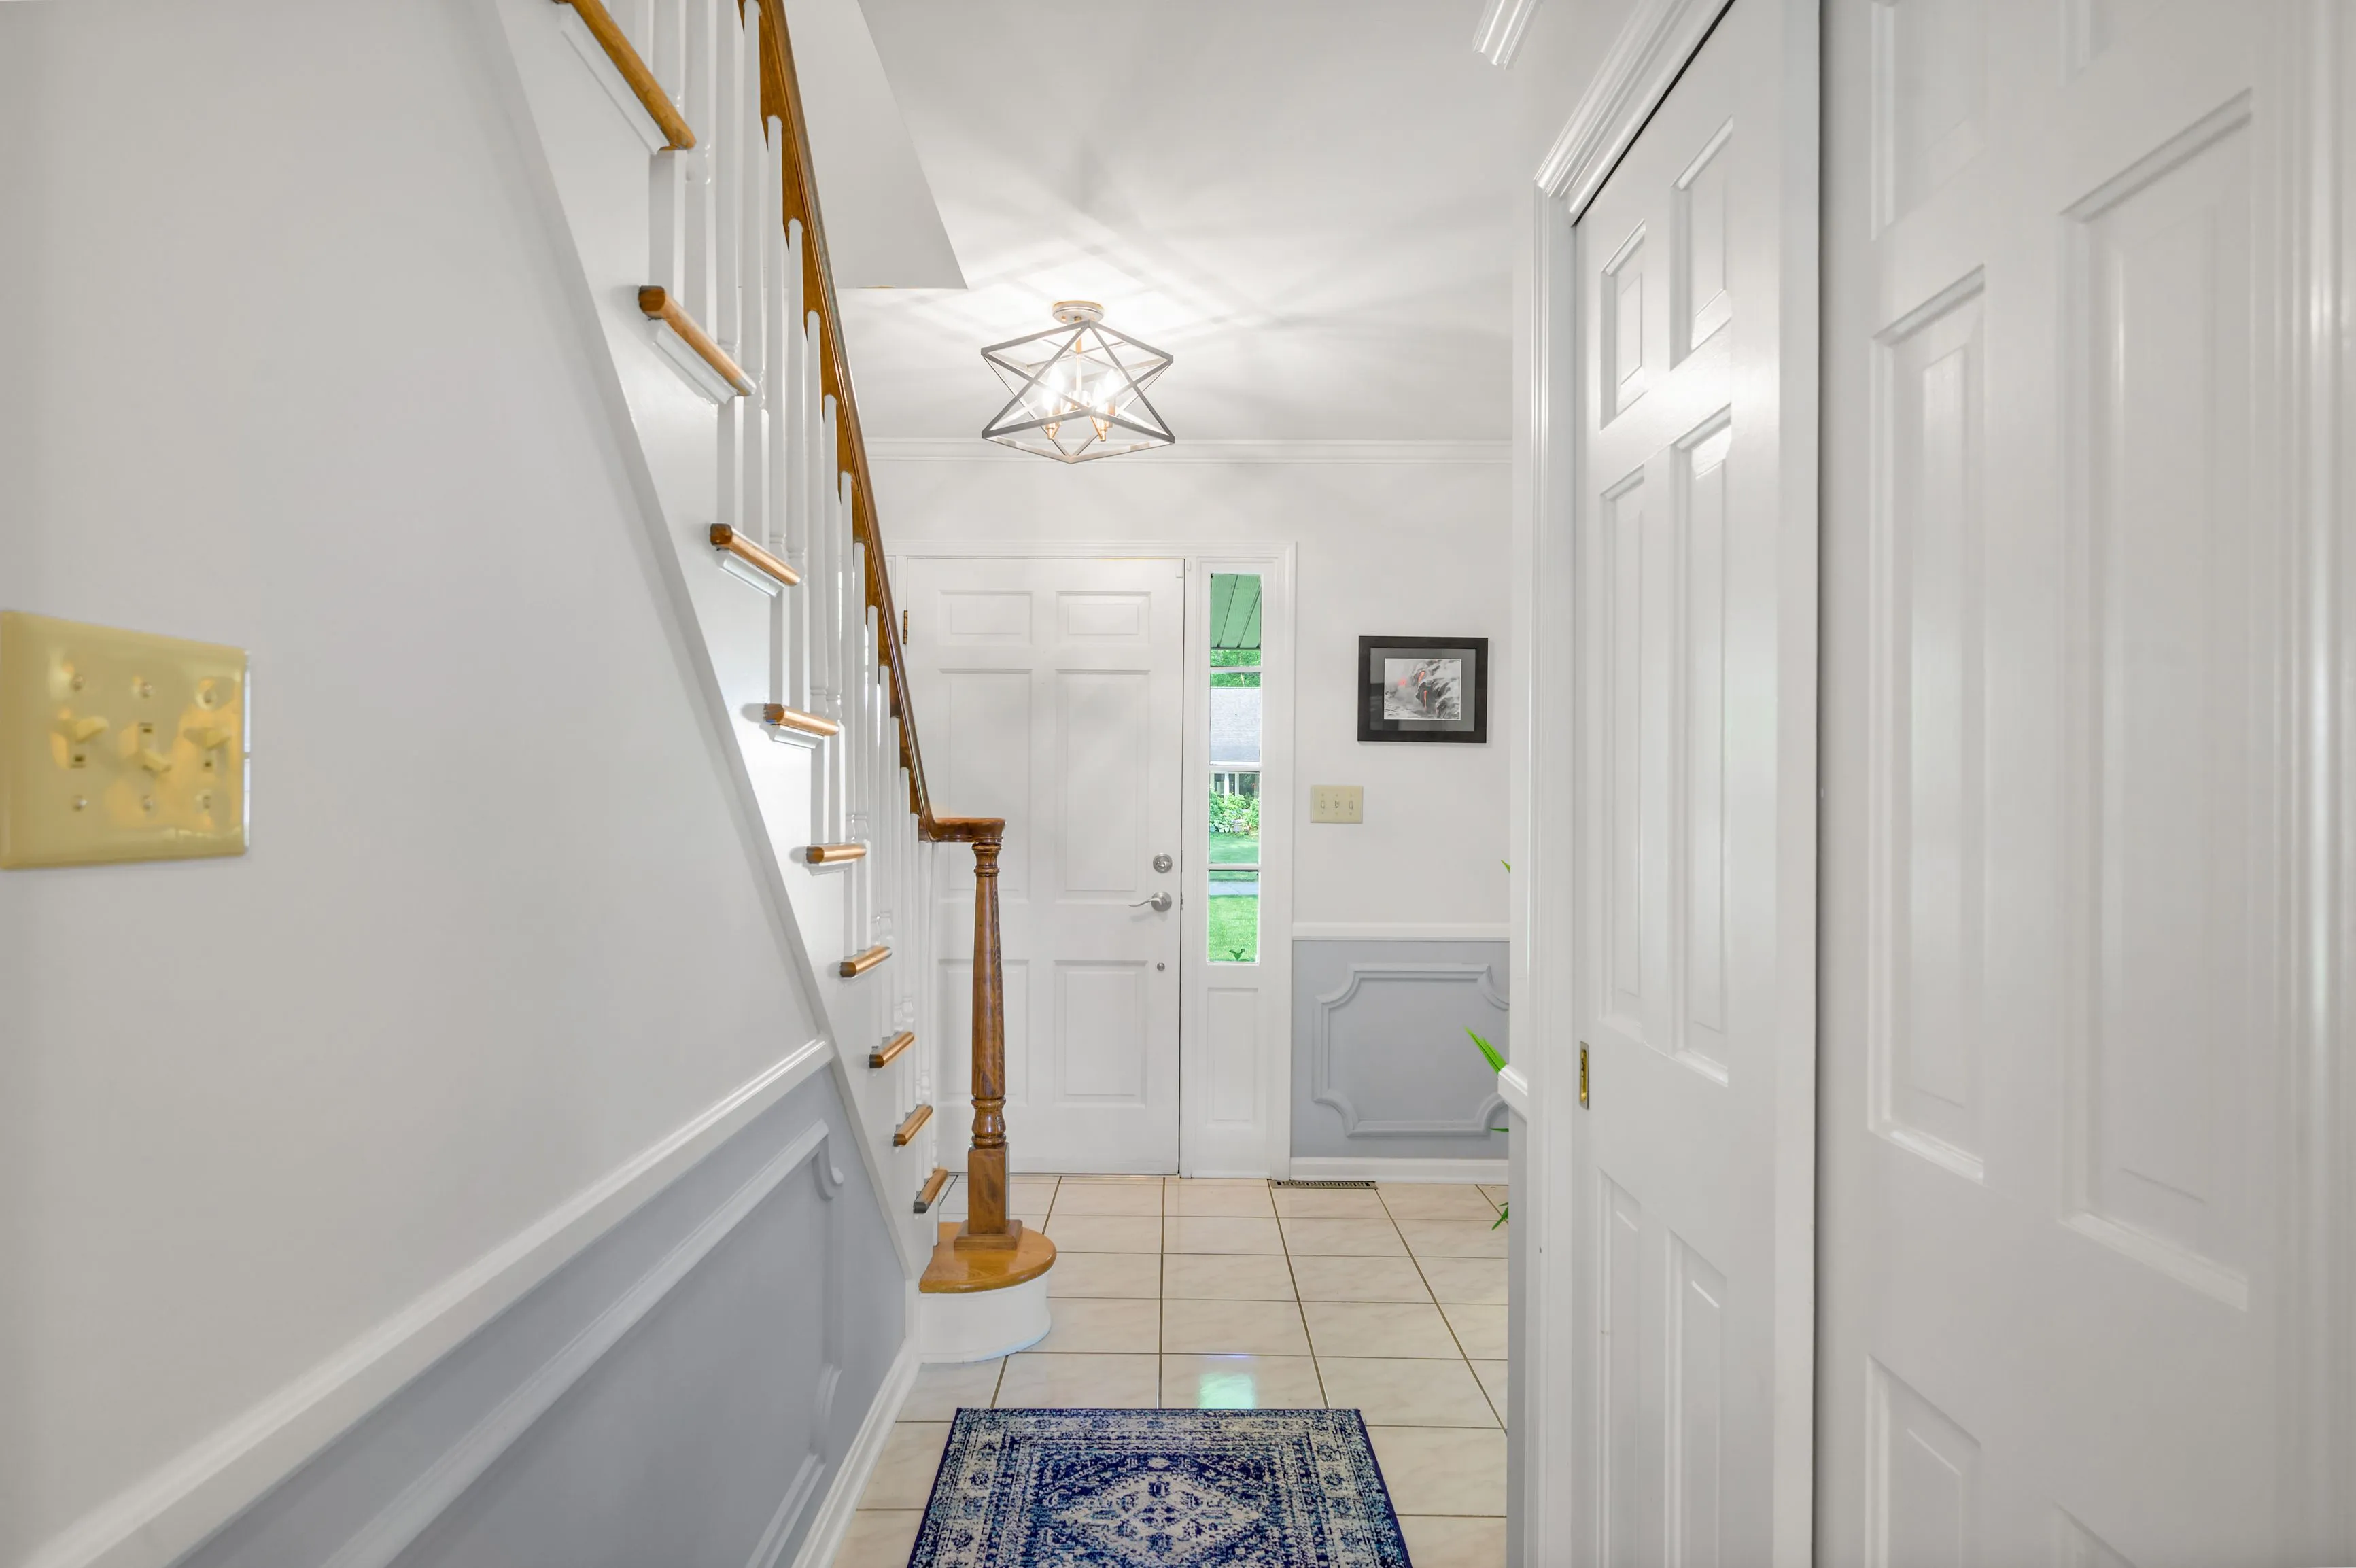 Narrow hallway in a home with white walls, a staircase on the left, and a blue decorative rug on the floor leading to other rooms.